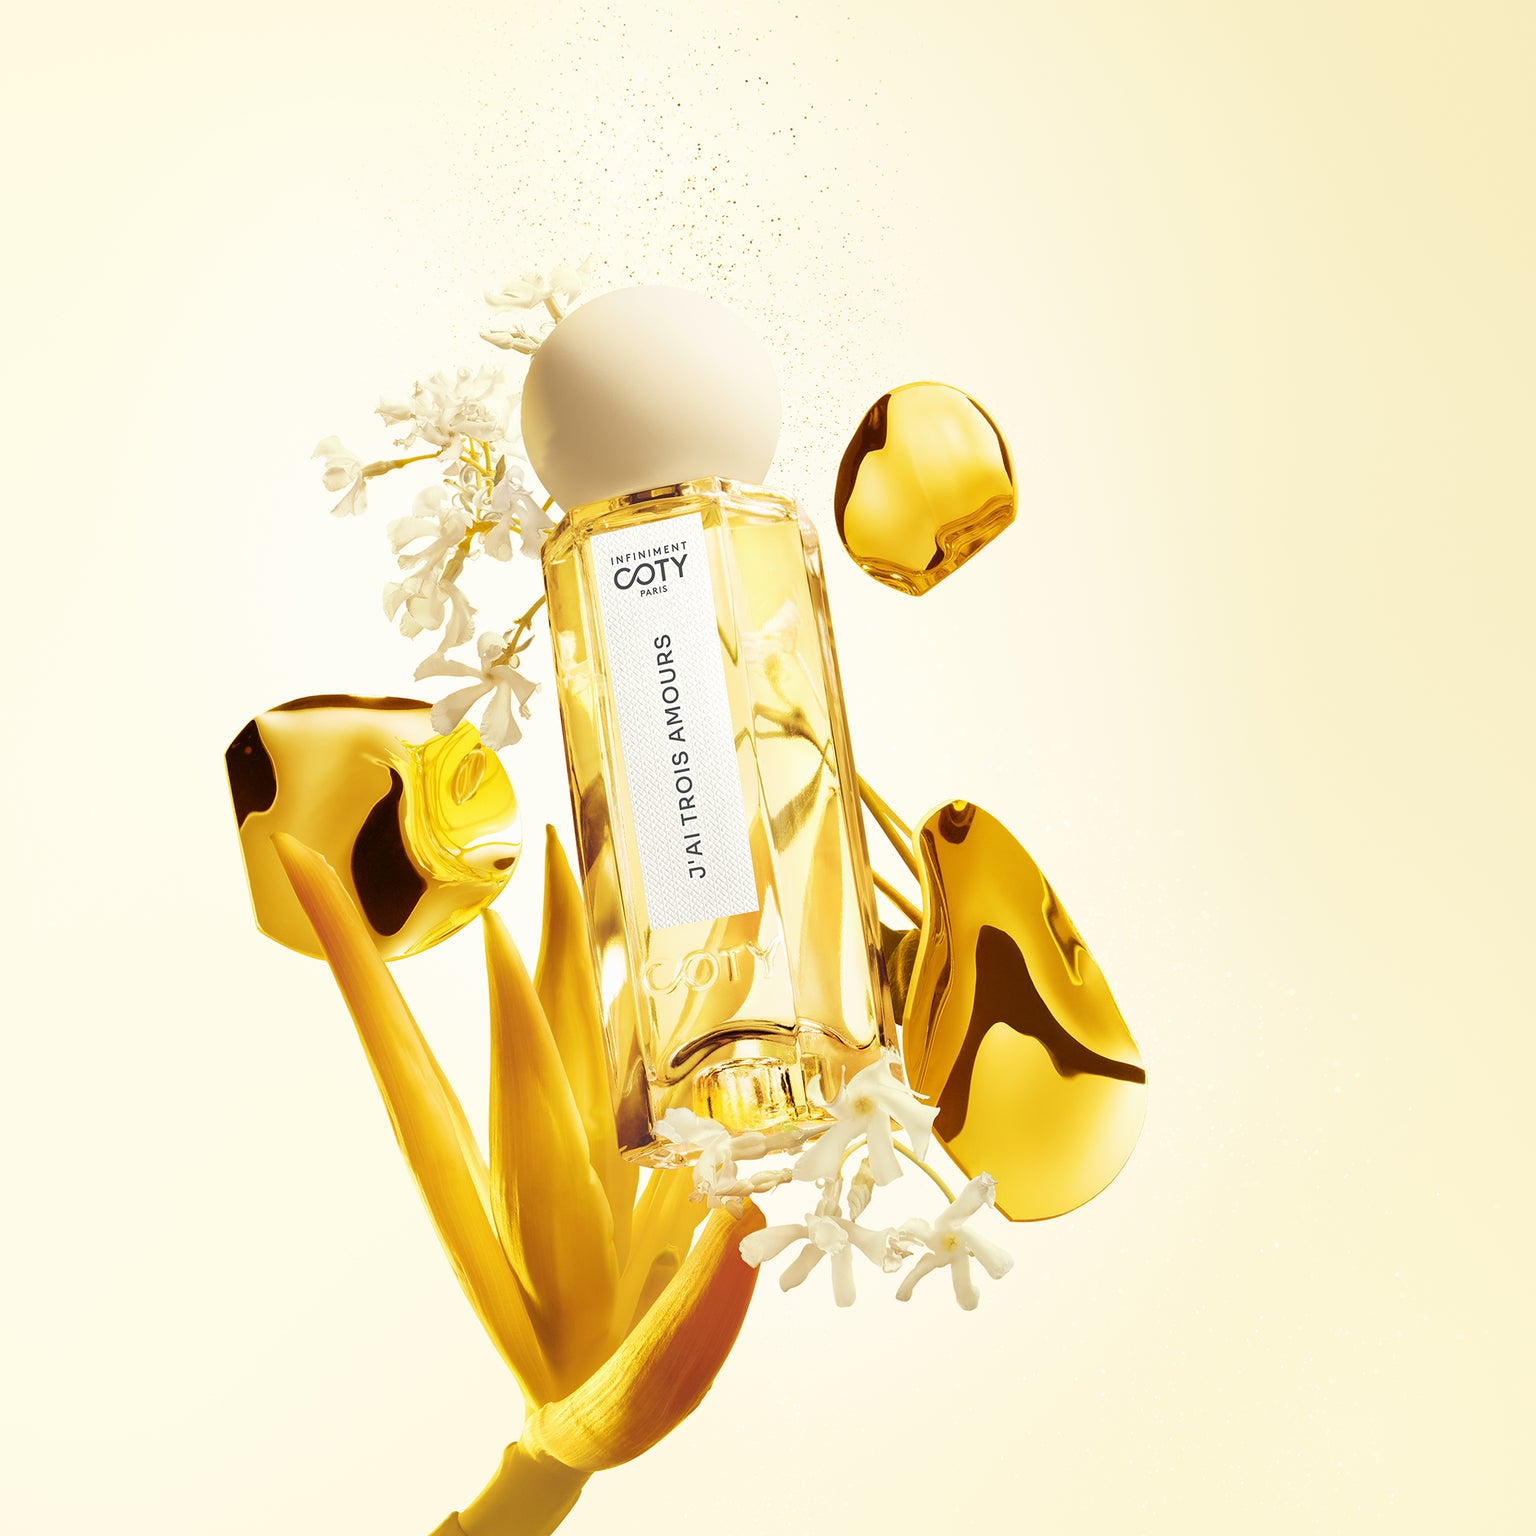 J'ai trois amours perfume bottle and ingredient